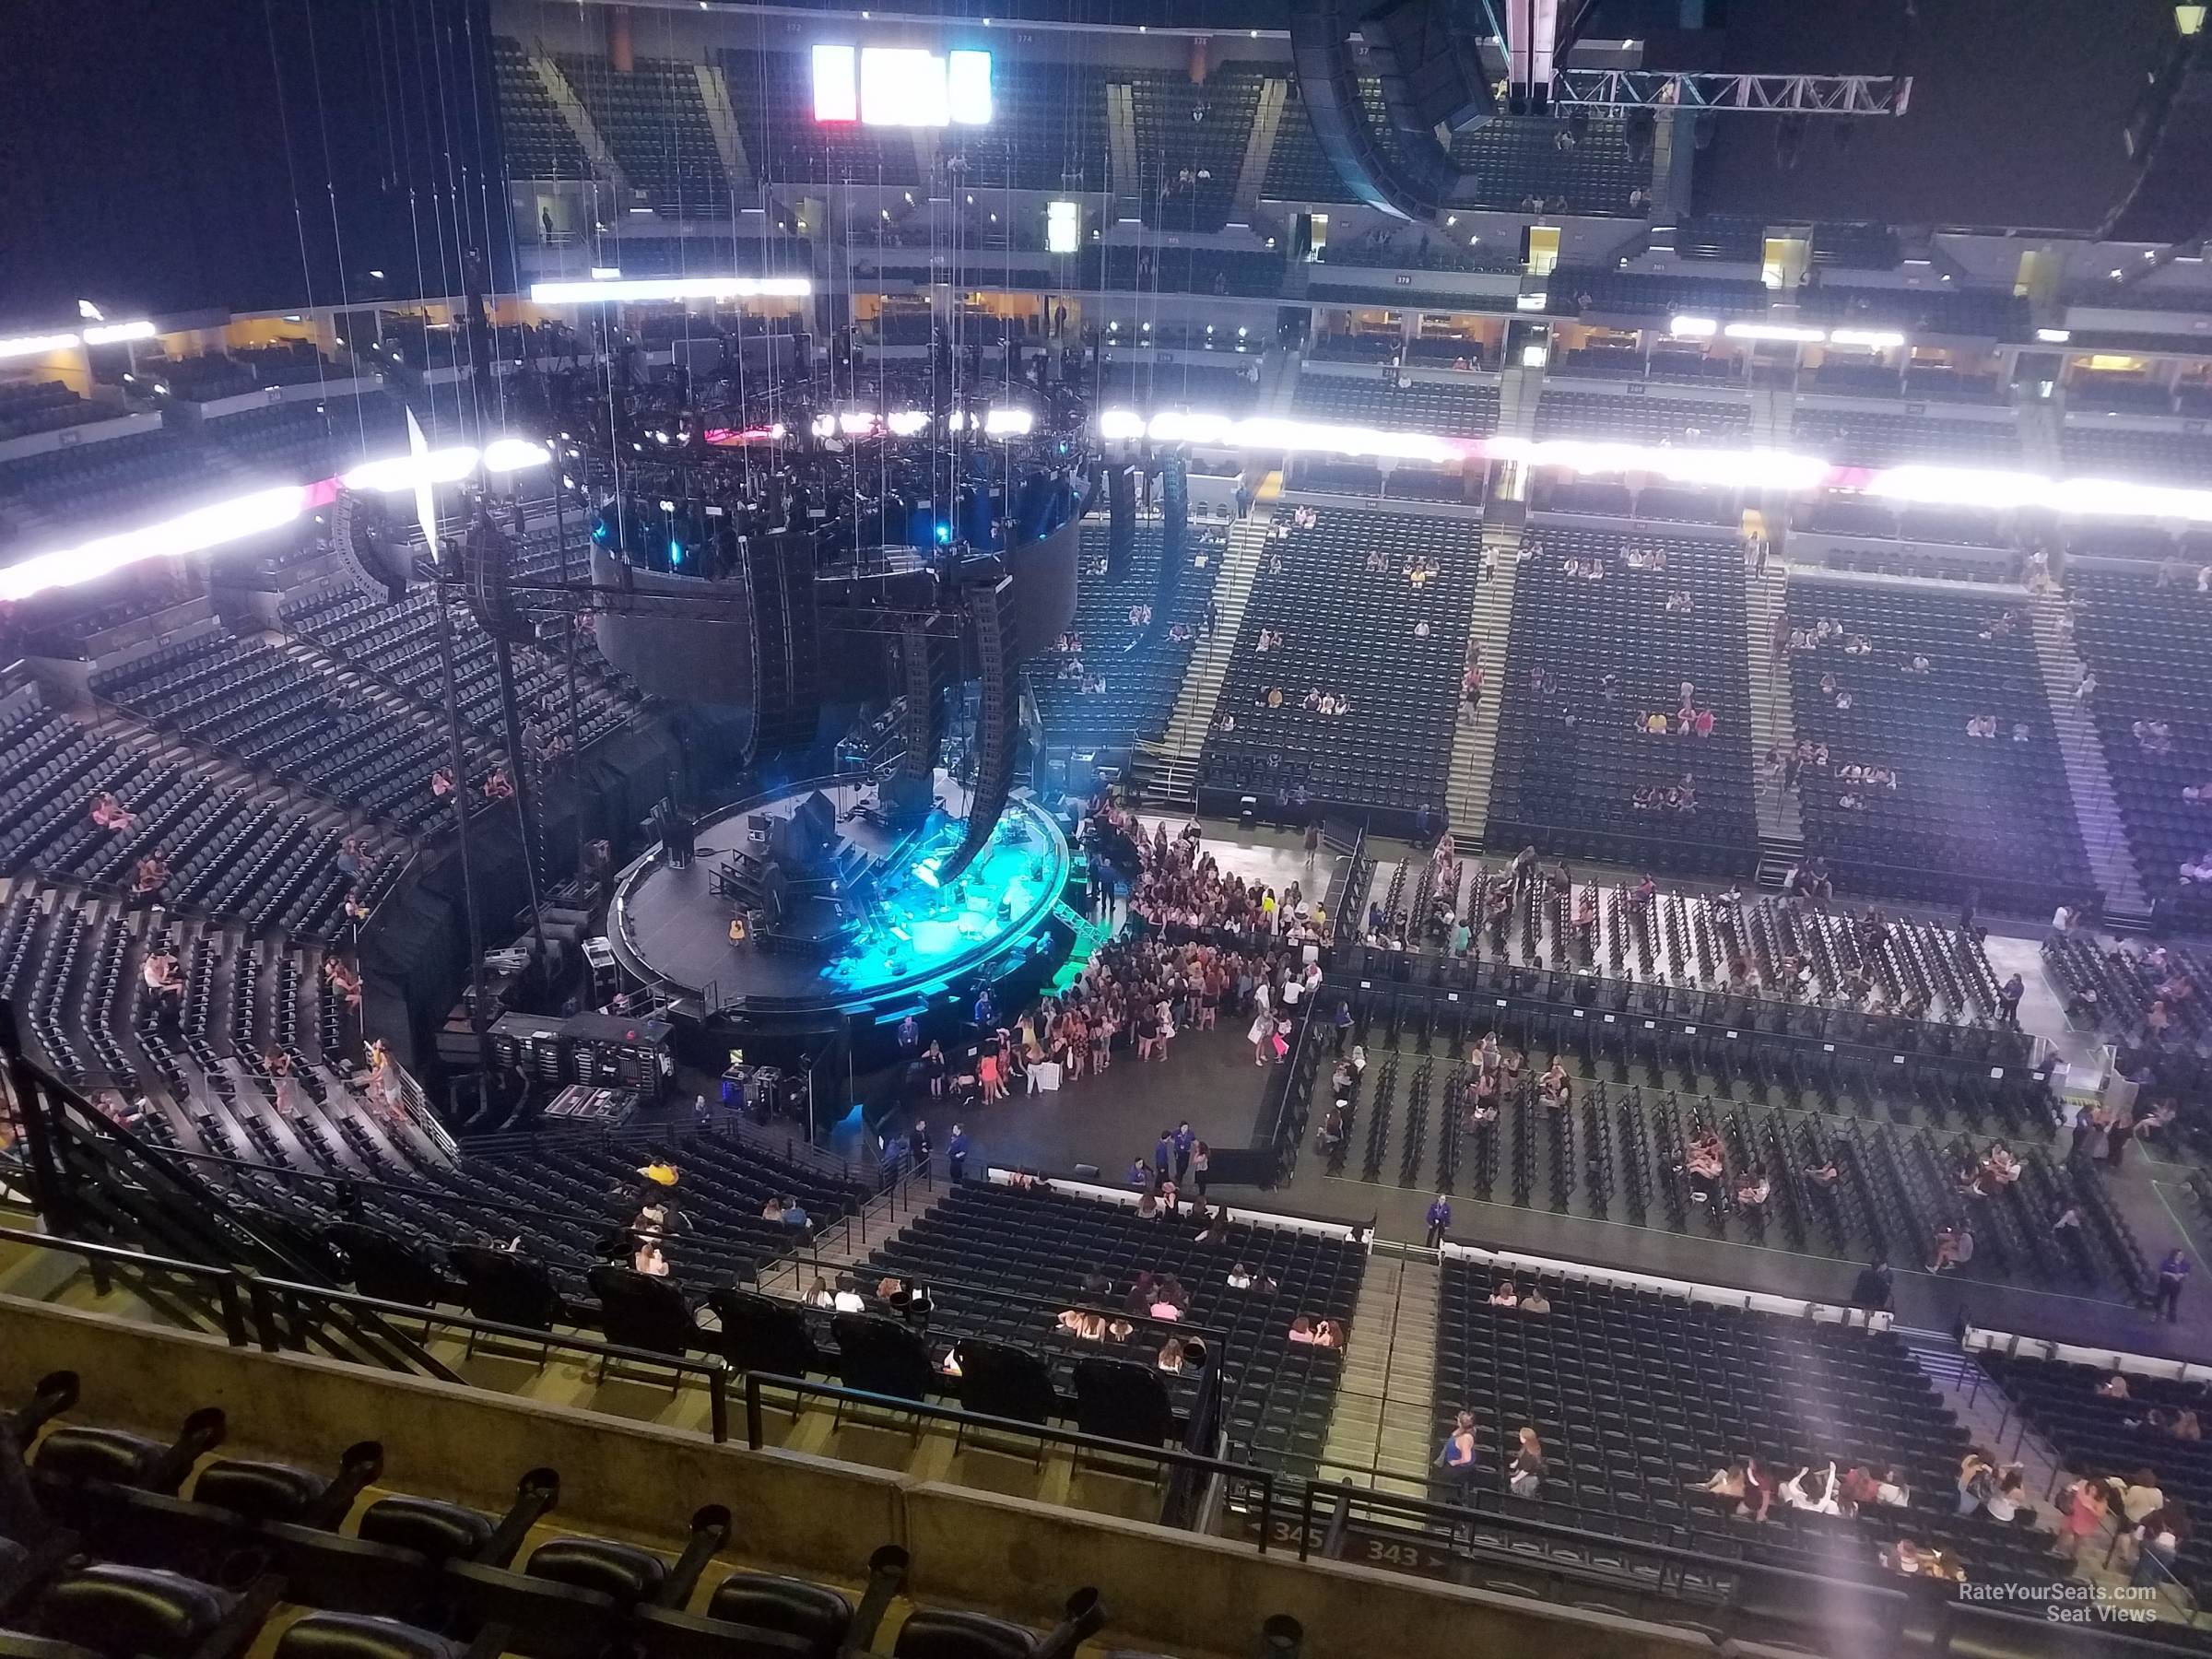 section 346, row 13 seat view  for concert - ball arena